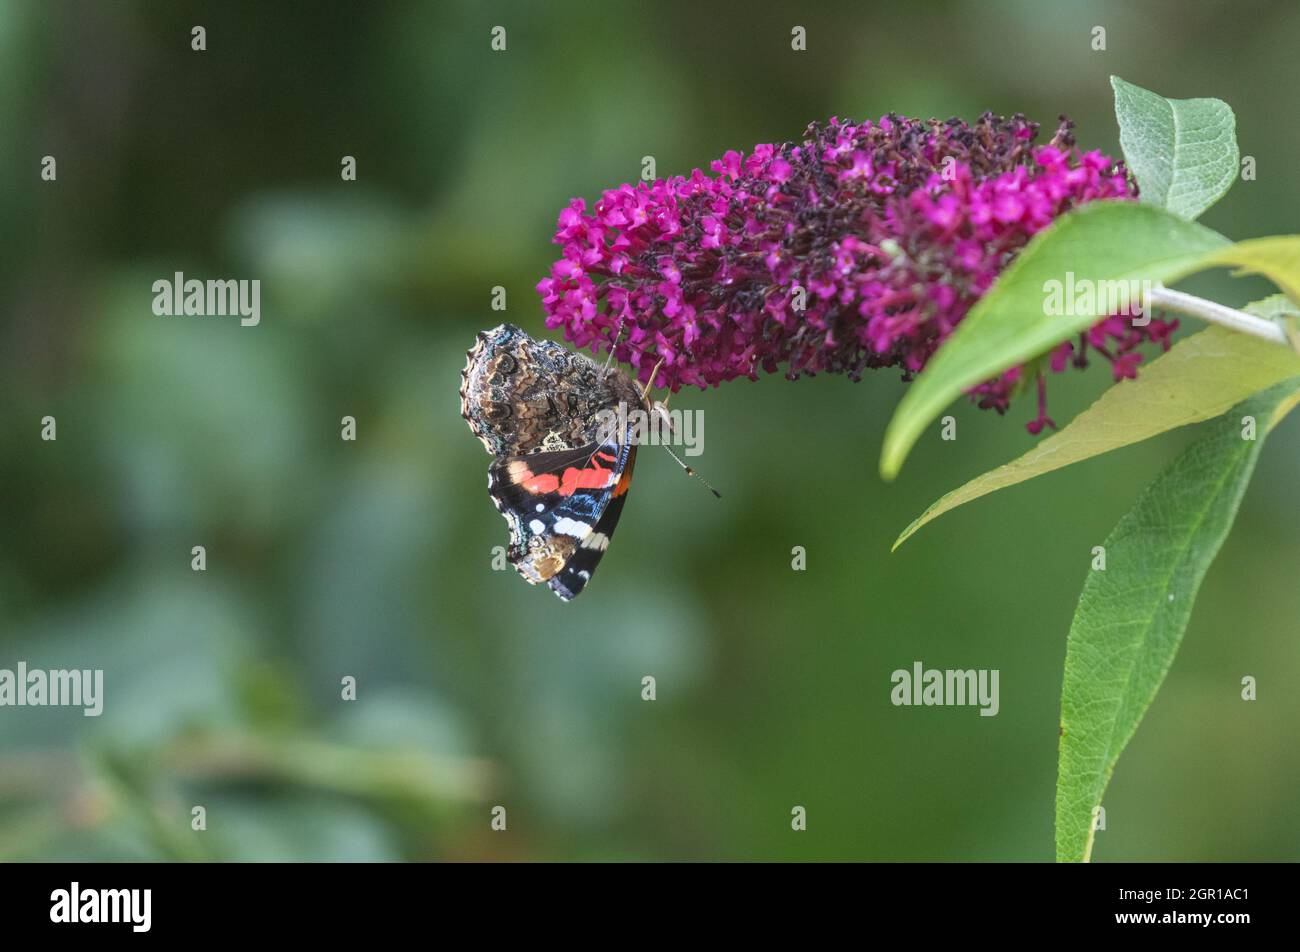 A red admiral butterfly (Vanessa atalanta) feeding on a buddleia flower. The wings are closed and the patterns of the underwings are clearly visible. Stock Photo